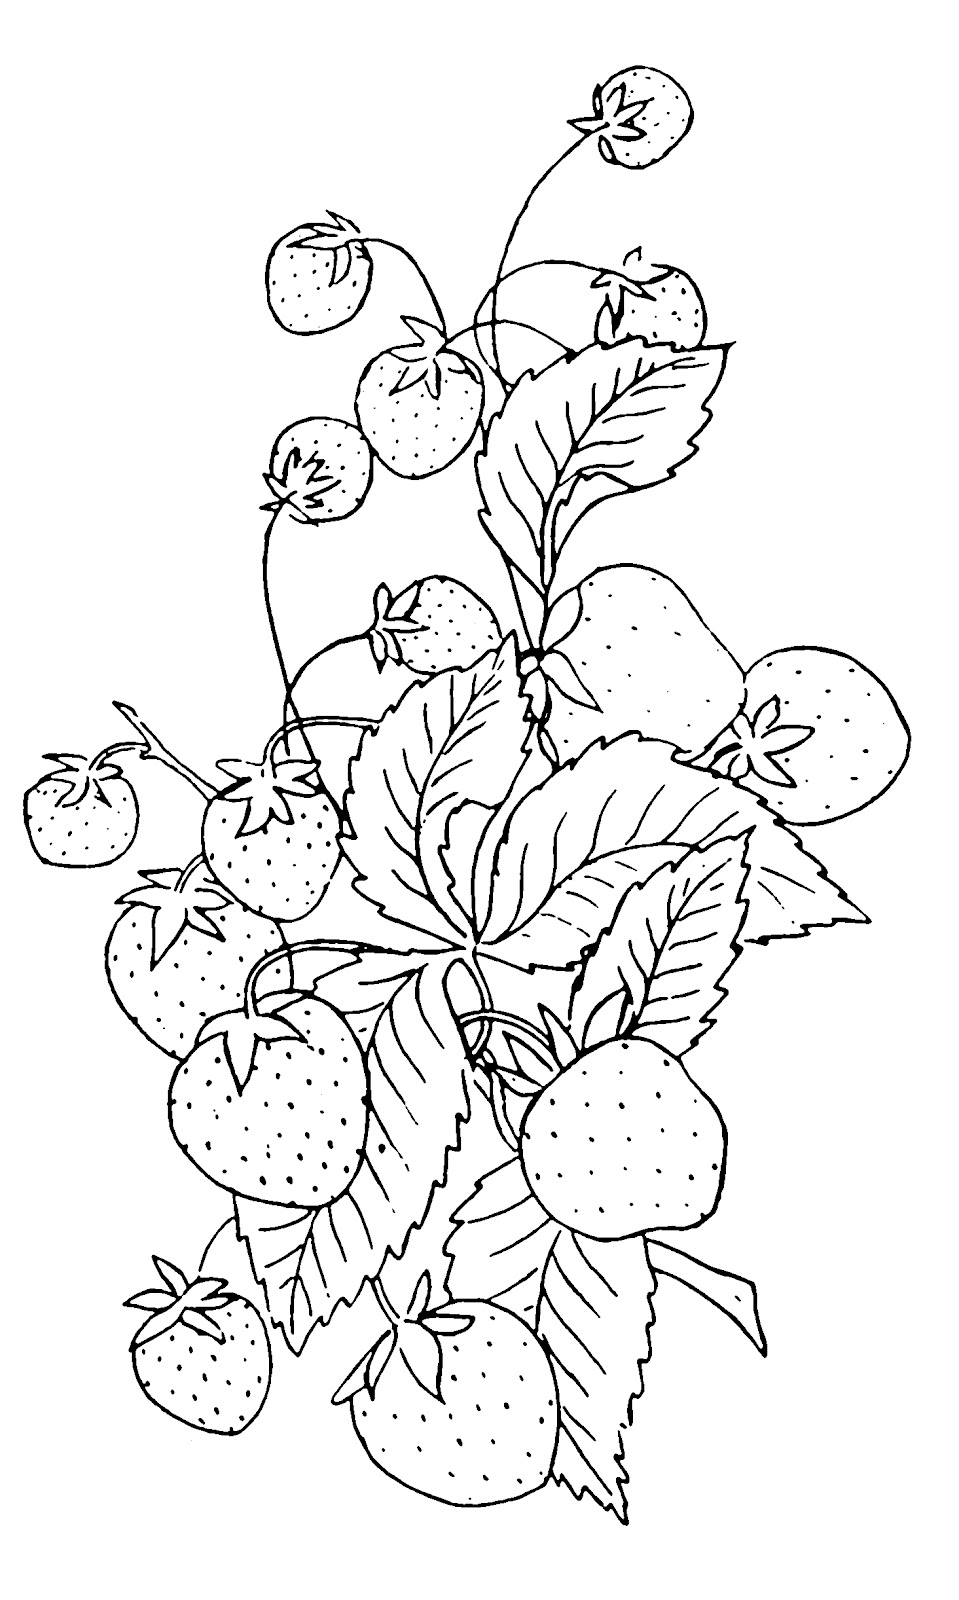 Strawberry Clipart Black And White Vintage Clip Art Strawberry